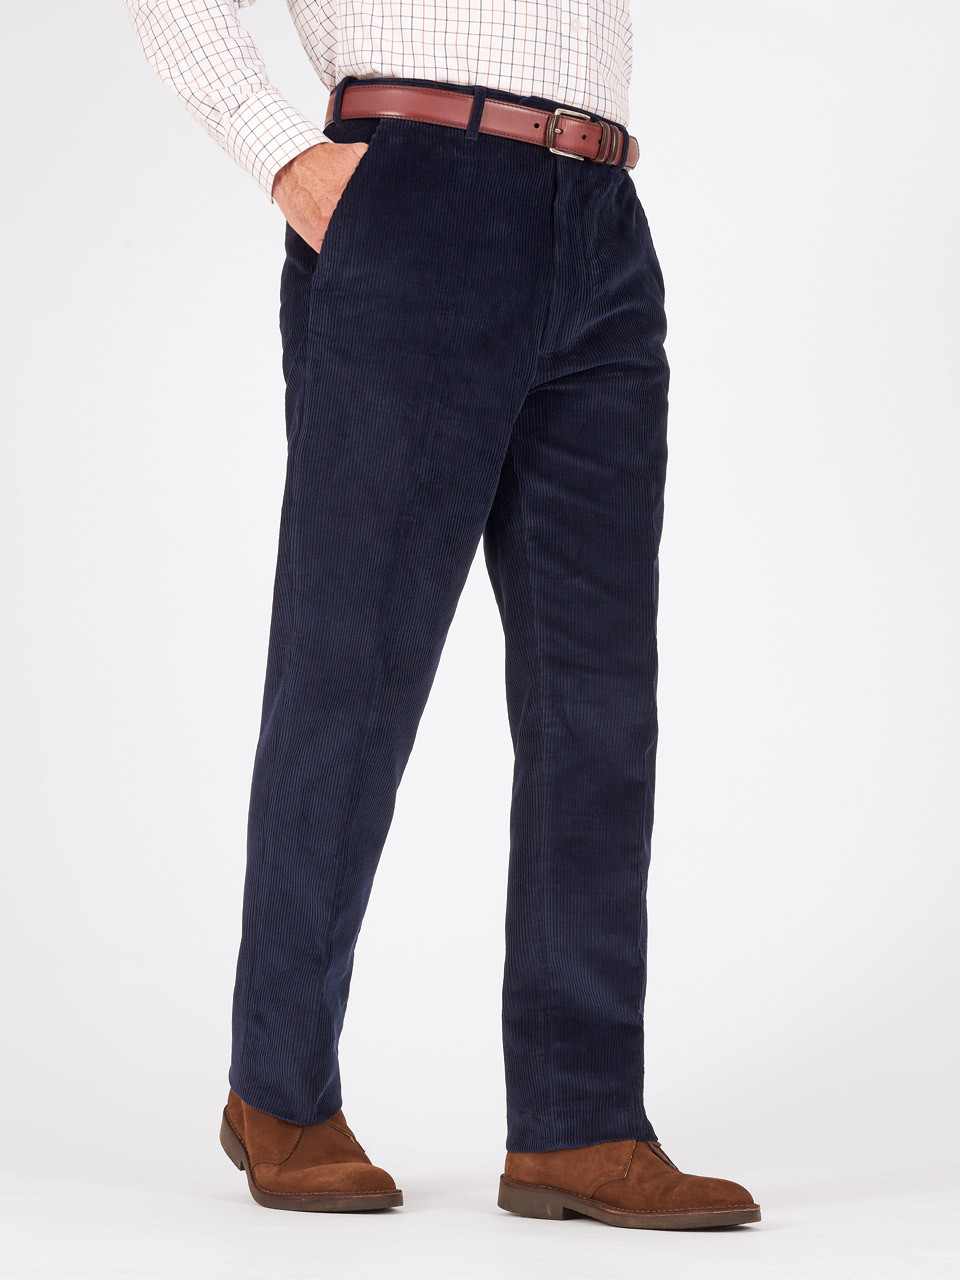 Buy Boys Corduroy Trousers Navy Online at Best Price  Mothercare